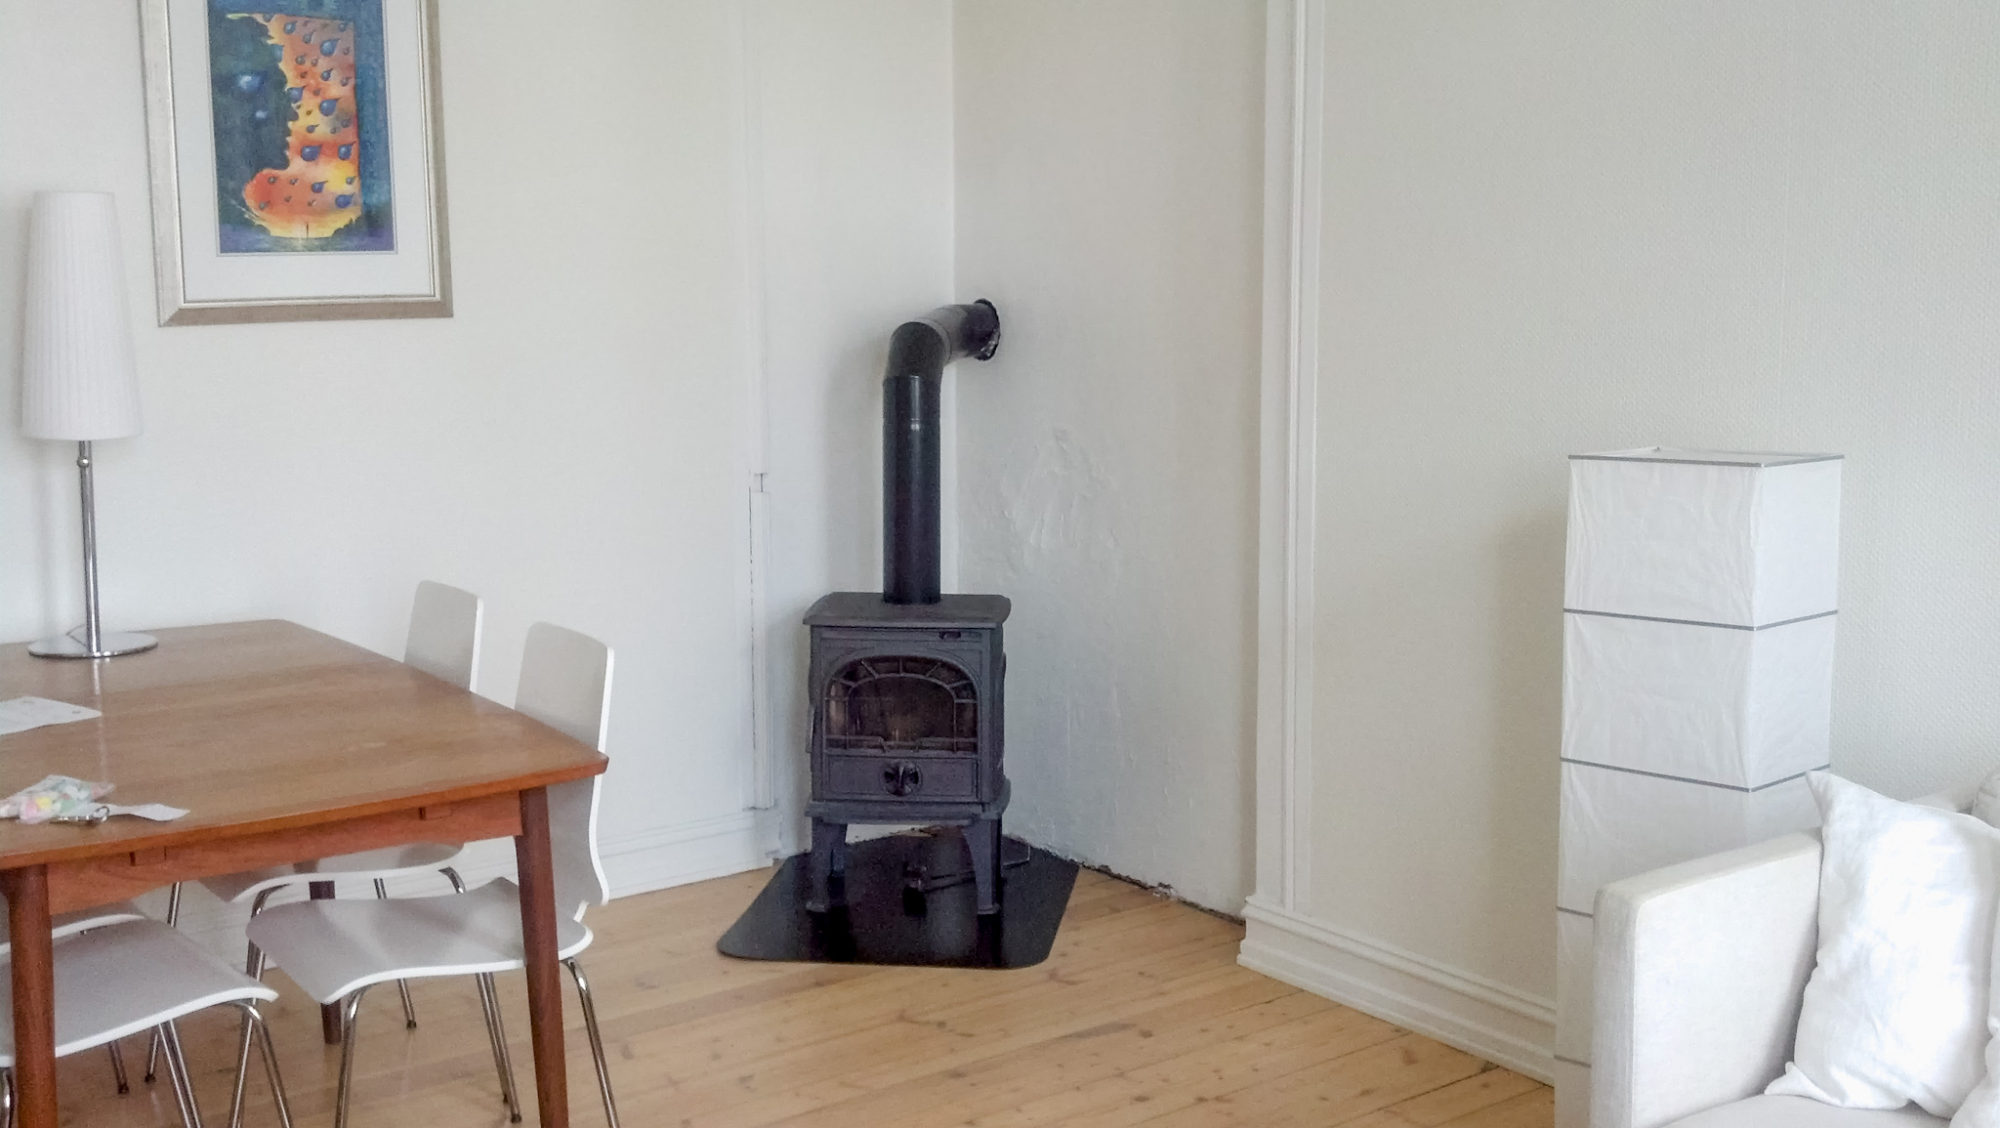 A fireplace in an Airbnb in Oslo